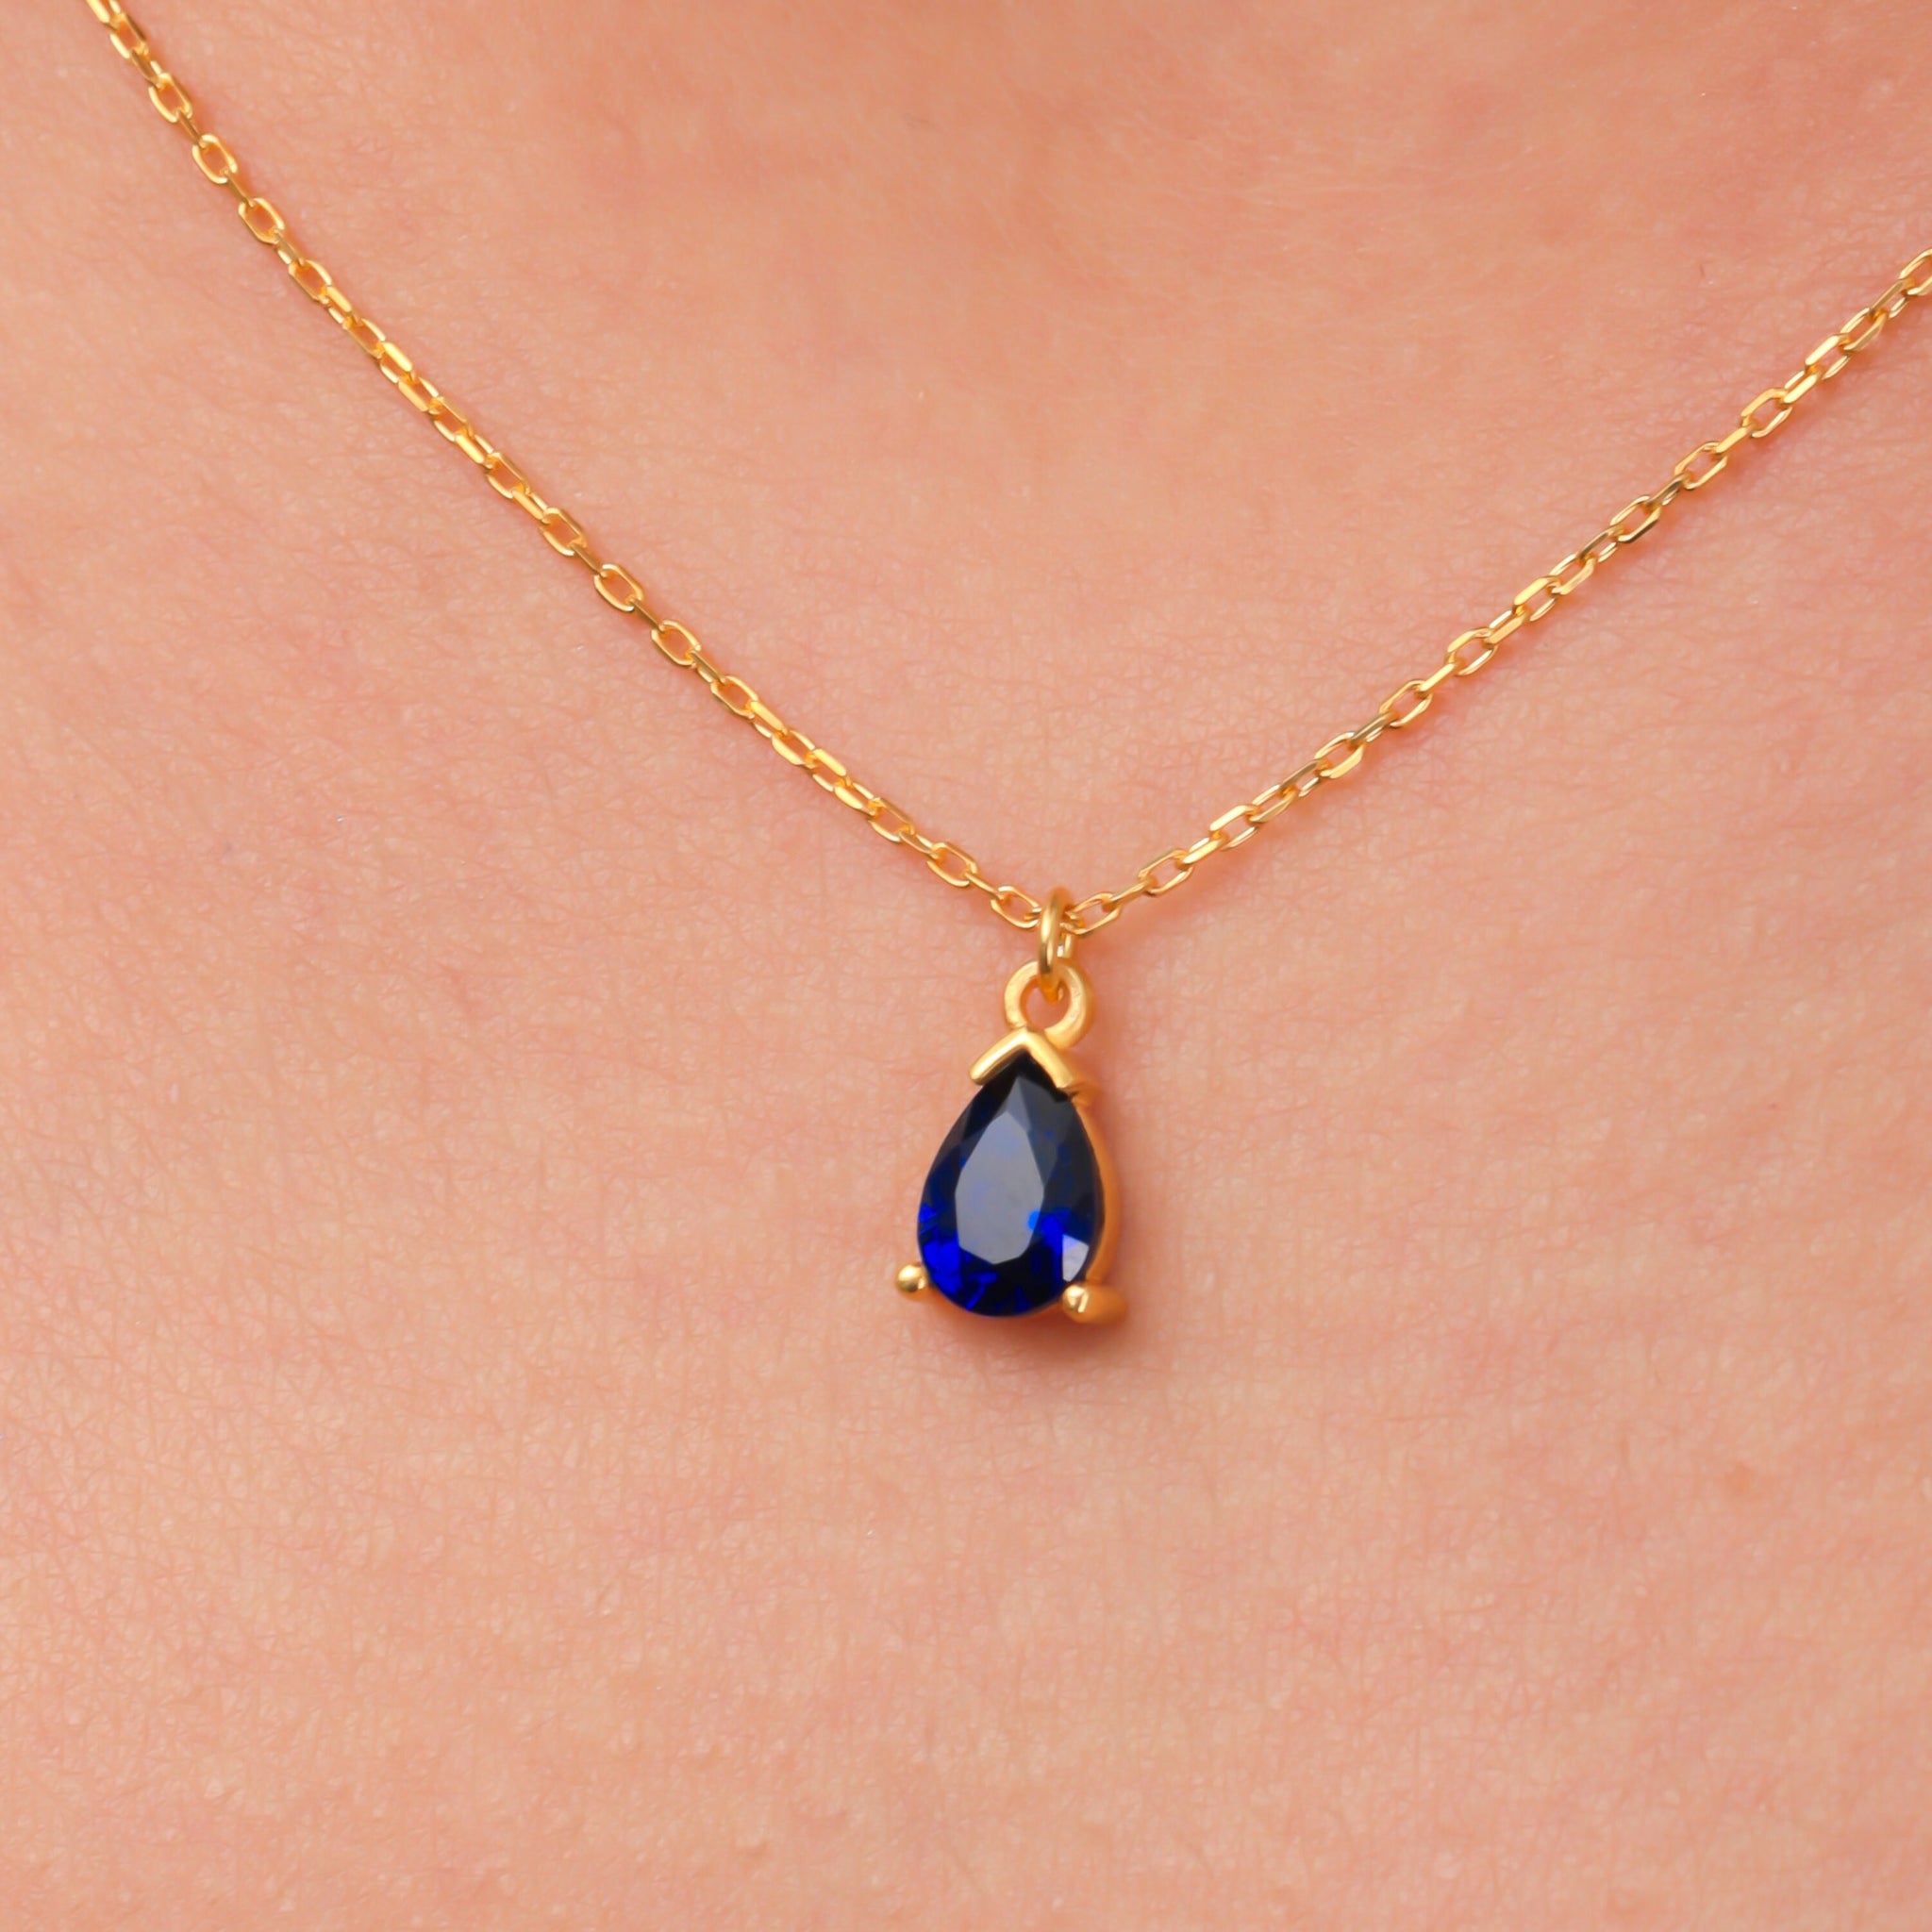 5th Wedding Anniversary Jewelry Gift Sapphire Teardrop Dainty Necklace Gold Filled Sapphire Jewelry Gift For Wife 4 Year Anniversary Gift